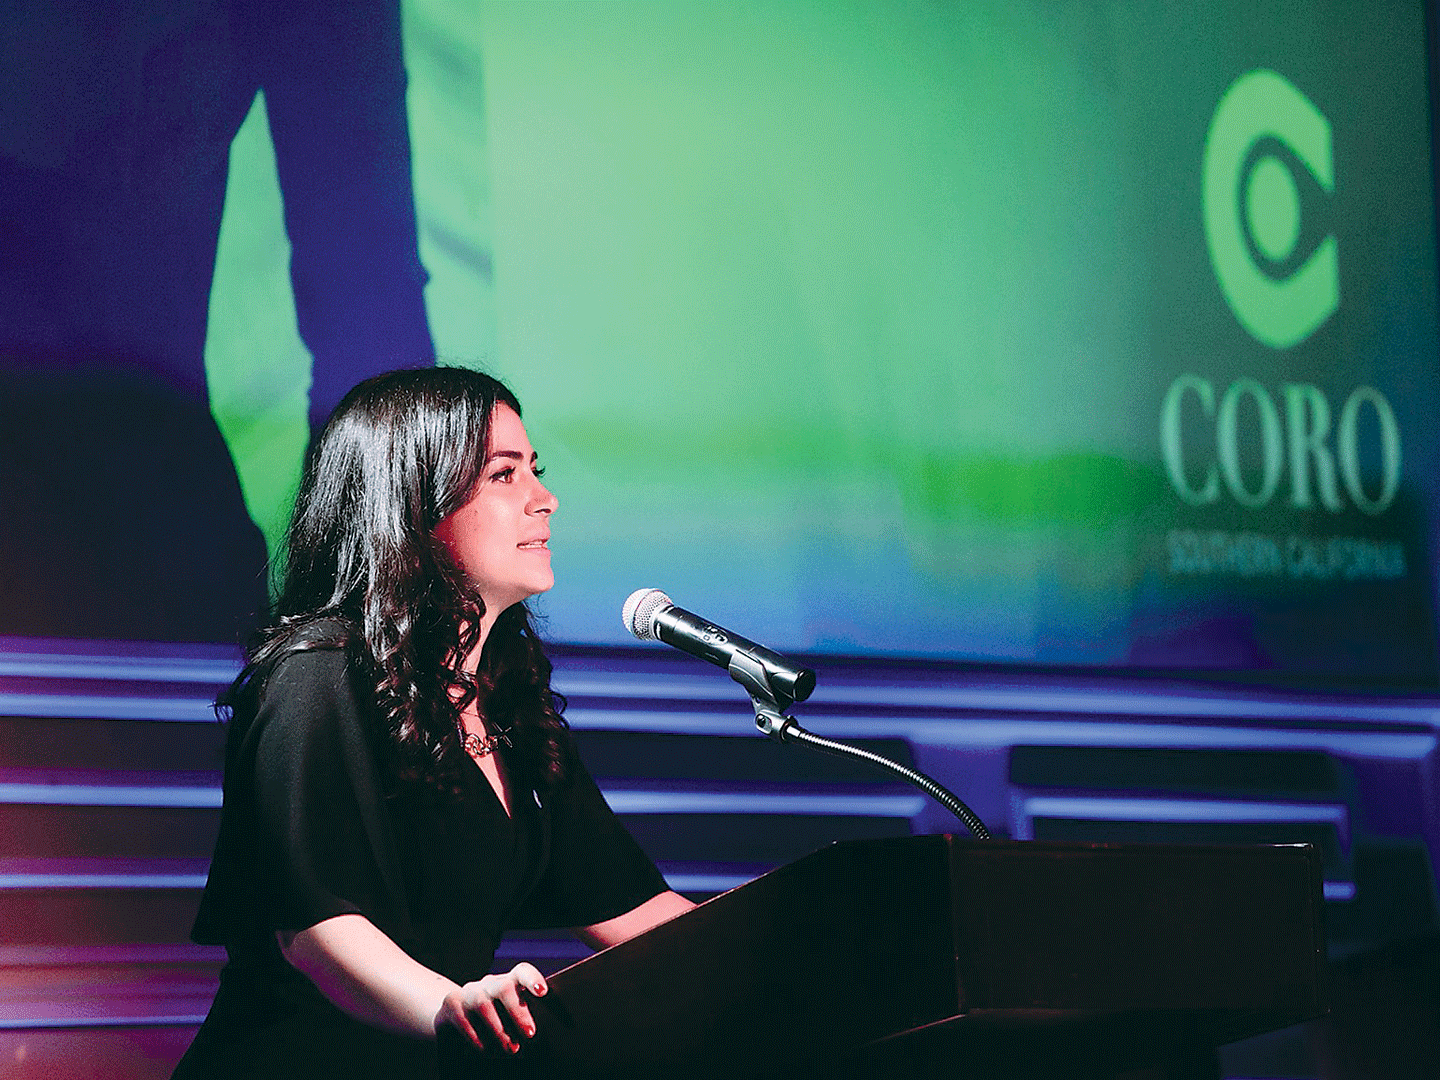 A woman speaks to an audience in a Gala